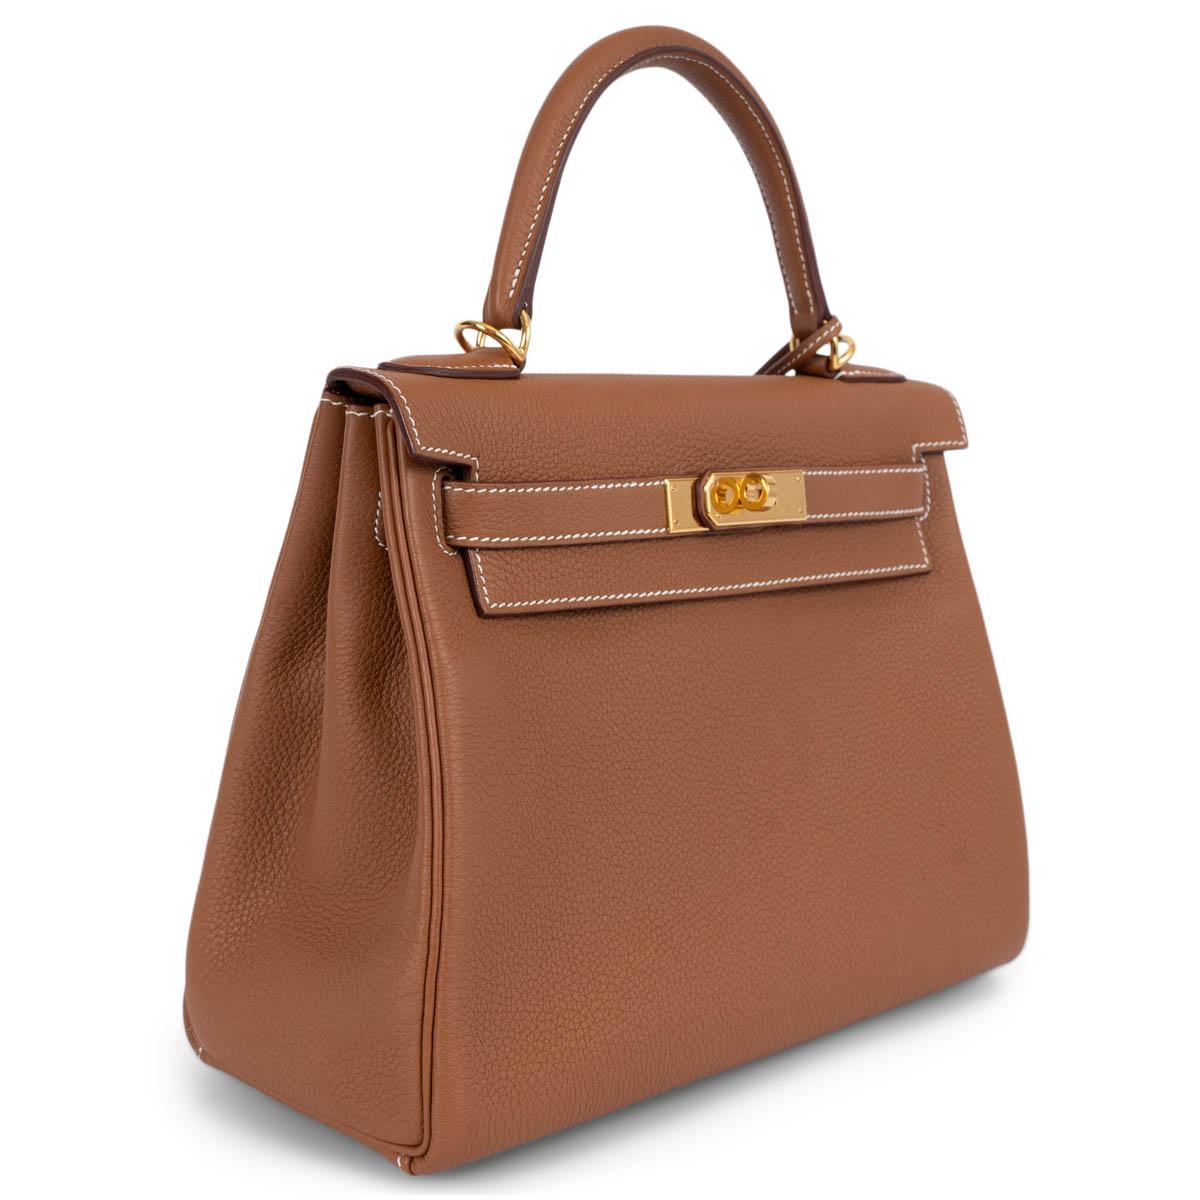 100% authentic Hermès Kelly 28 Retourne Touch bag in Gold (camel) Veau Togo leather with gold plated hardware. Lined in Chevre (goat skin) with two open pockets against the front and a zipper pocket against the back. Has been carried and is in